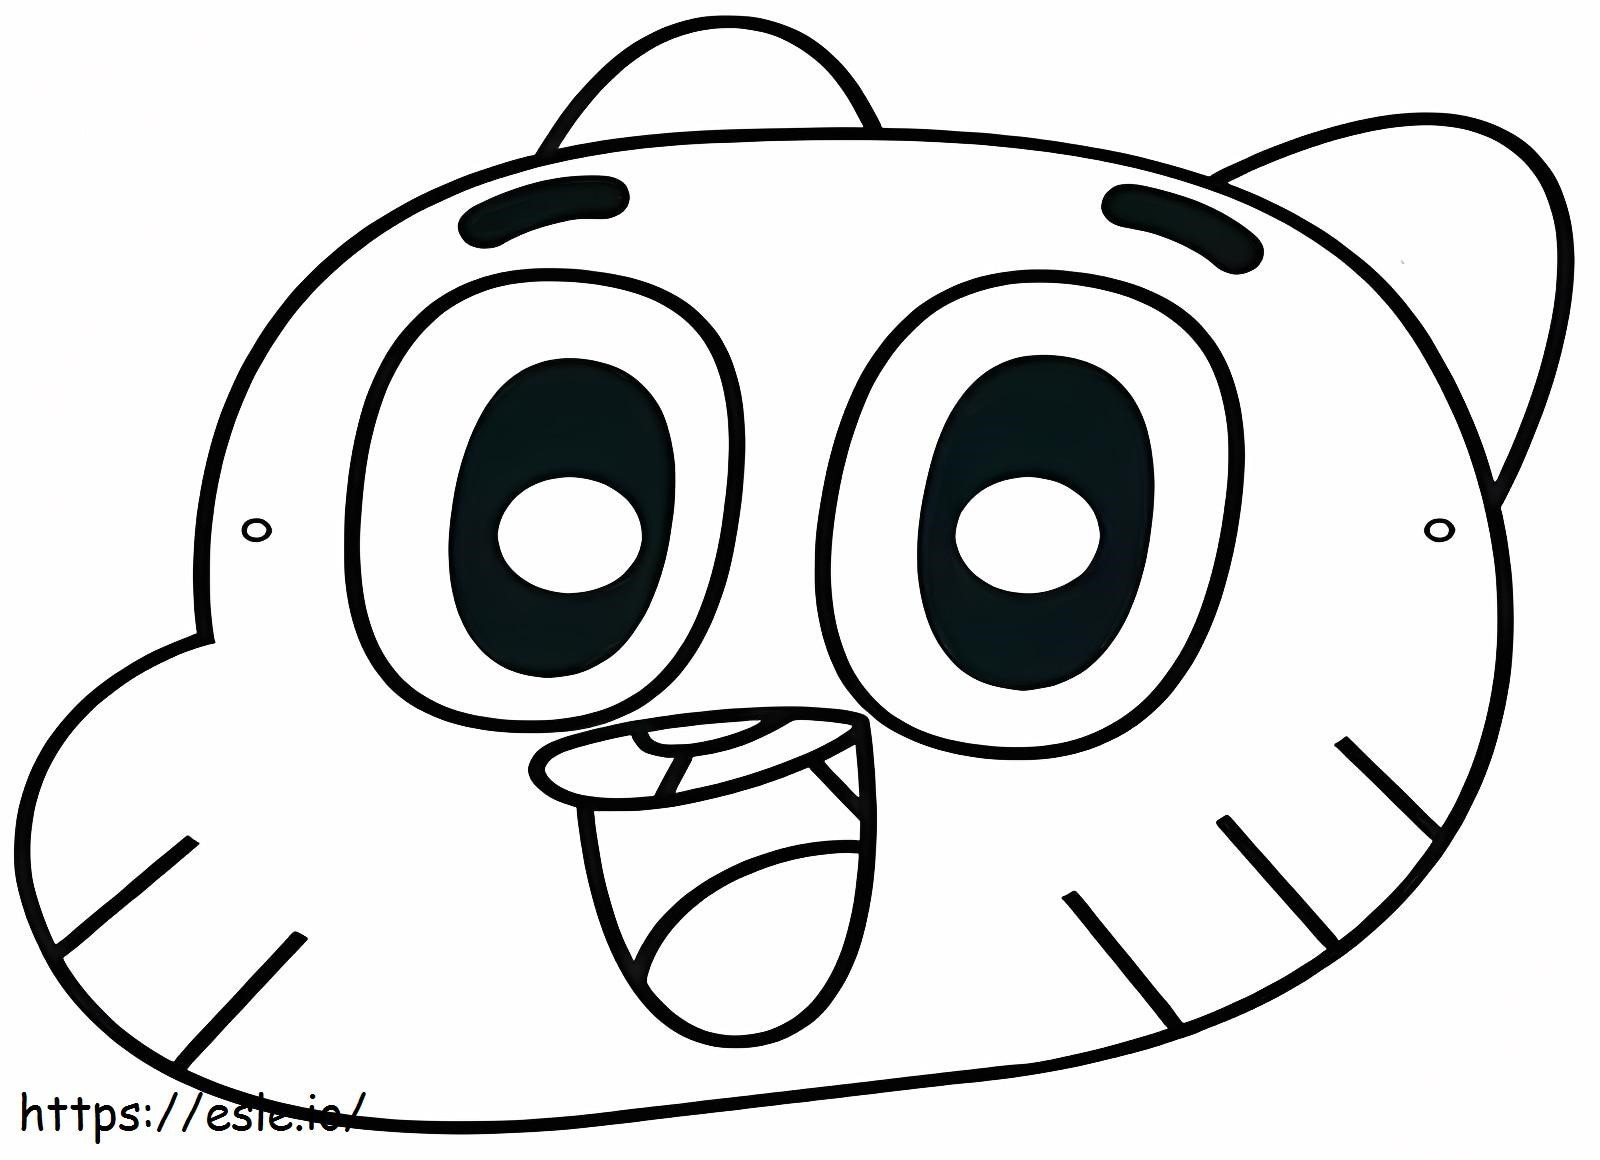 1562118891_3Gumball Face coloring page